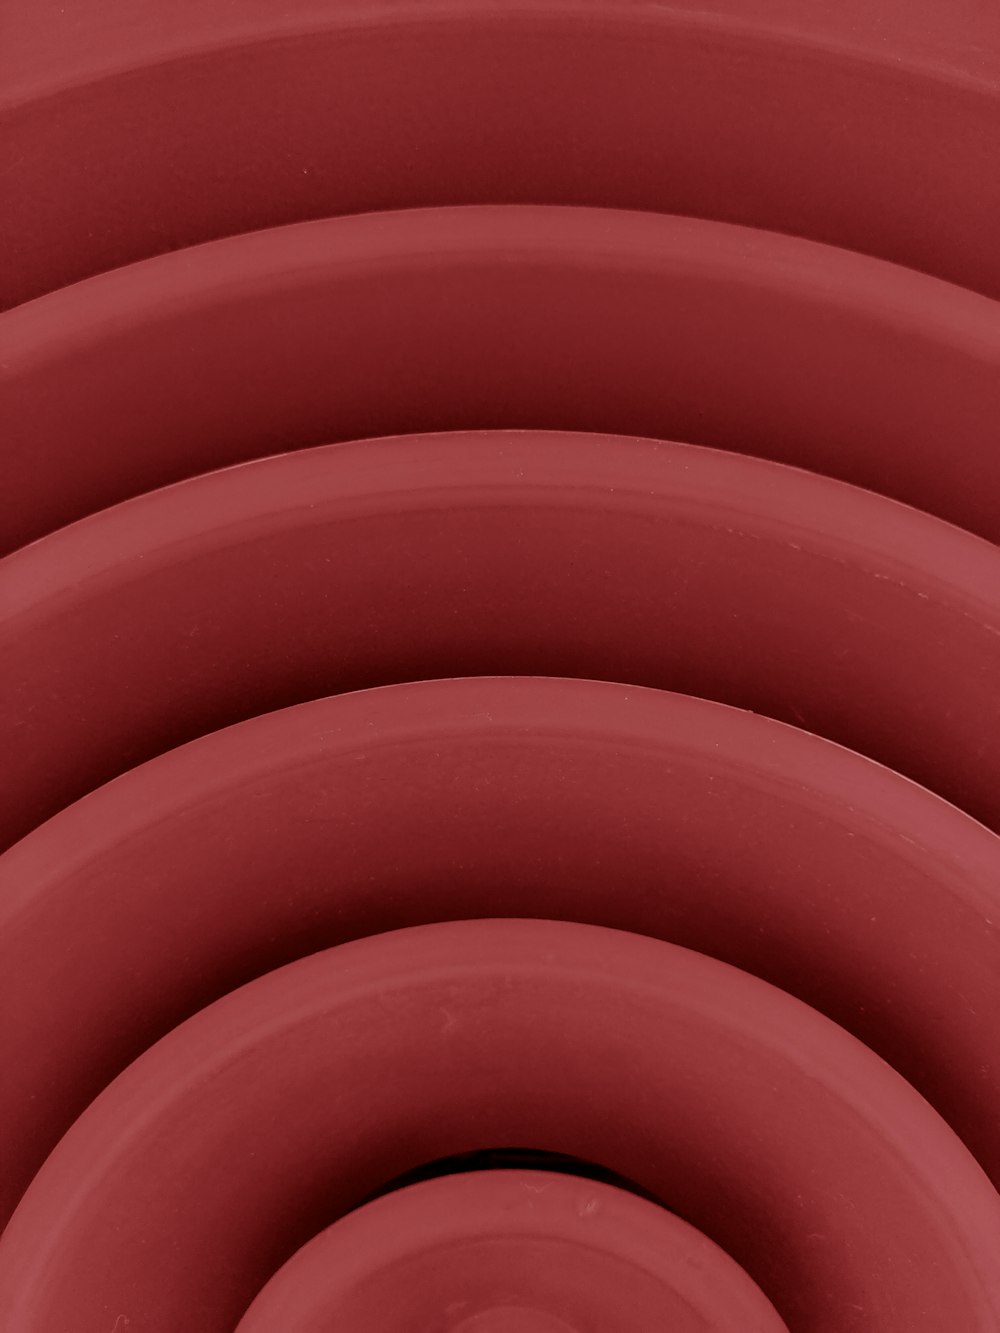 a close up of a red object with many circles